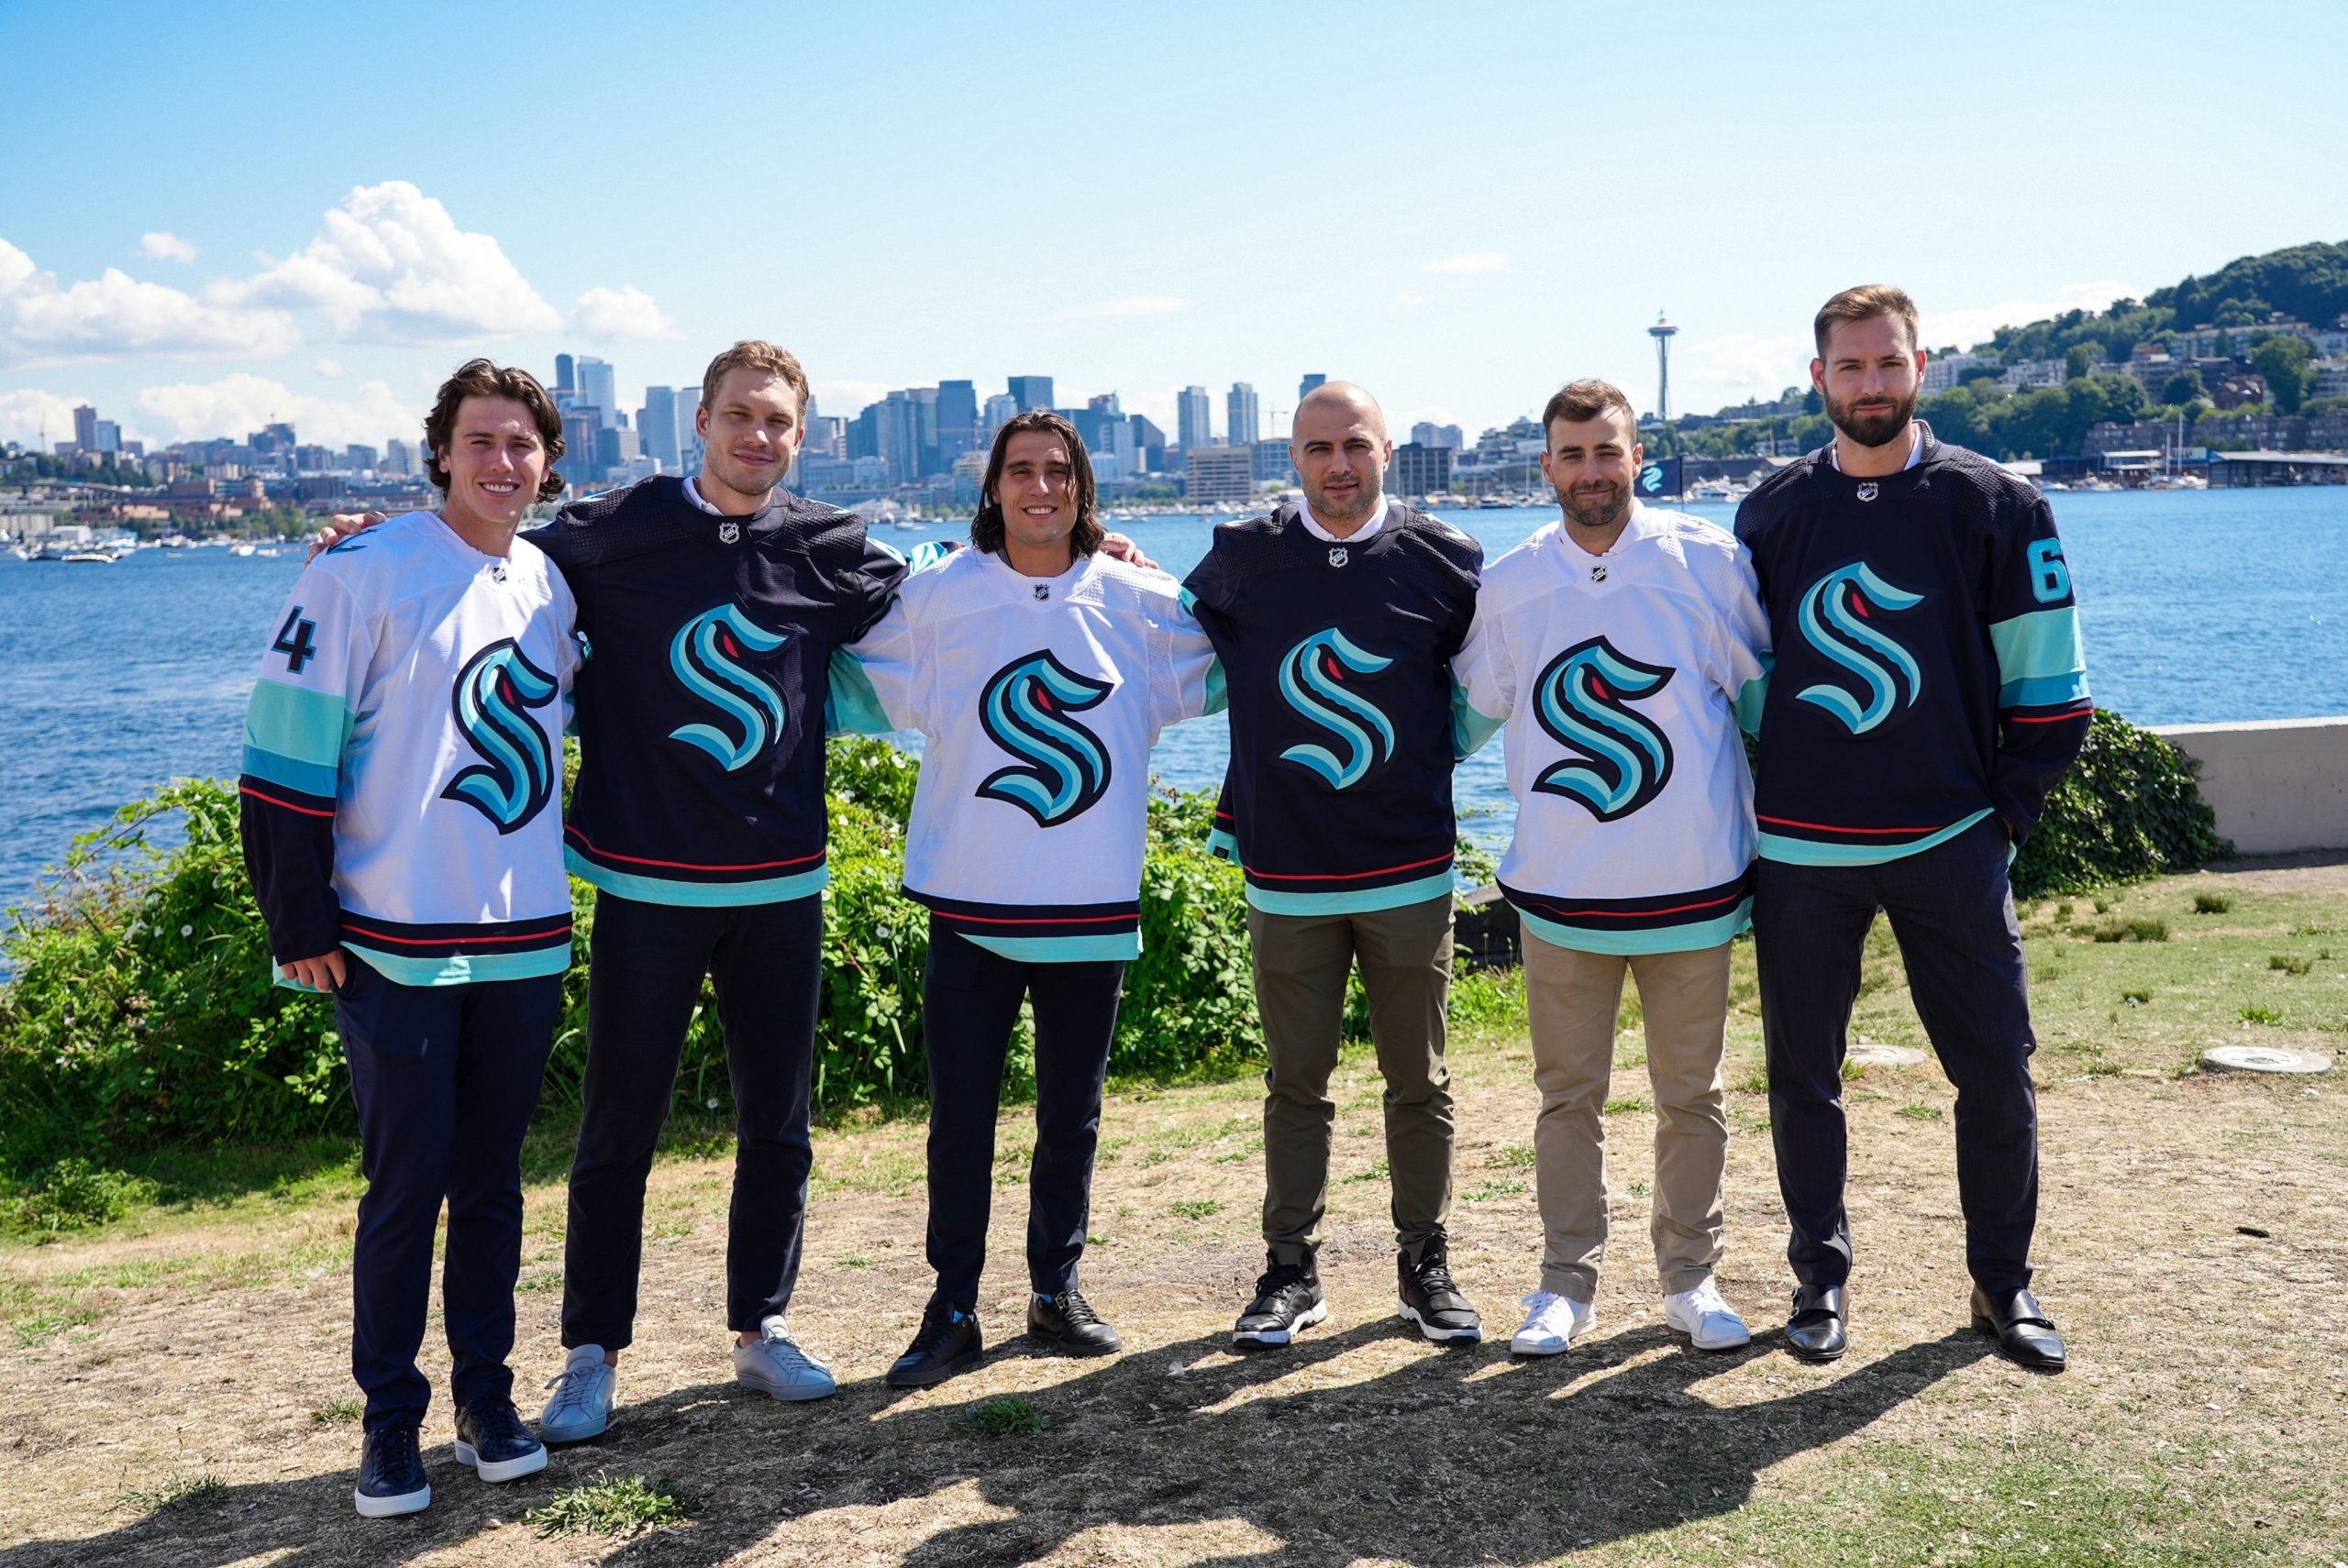 Release the Kraken: Seattle ready for NHL debut after expansion draft